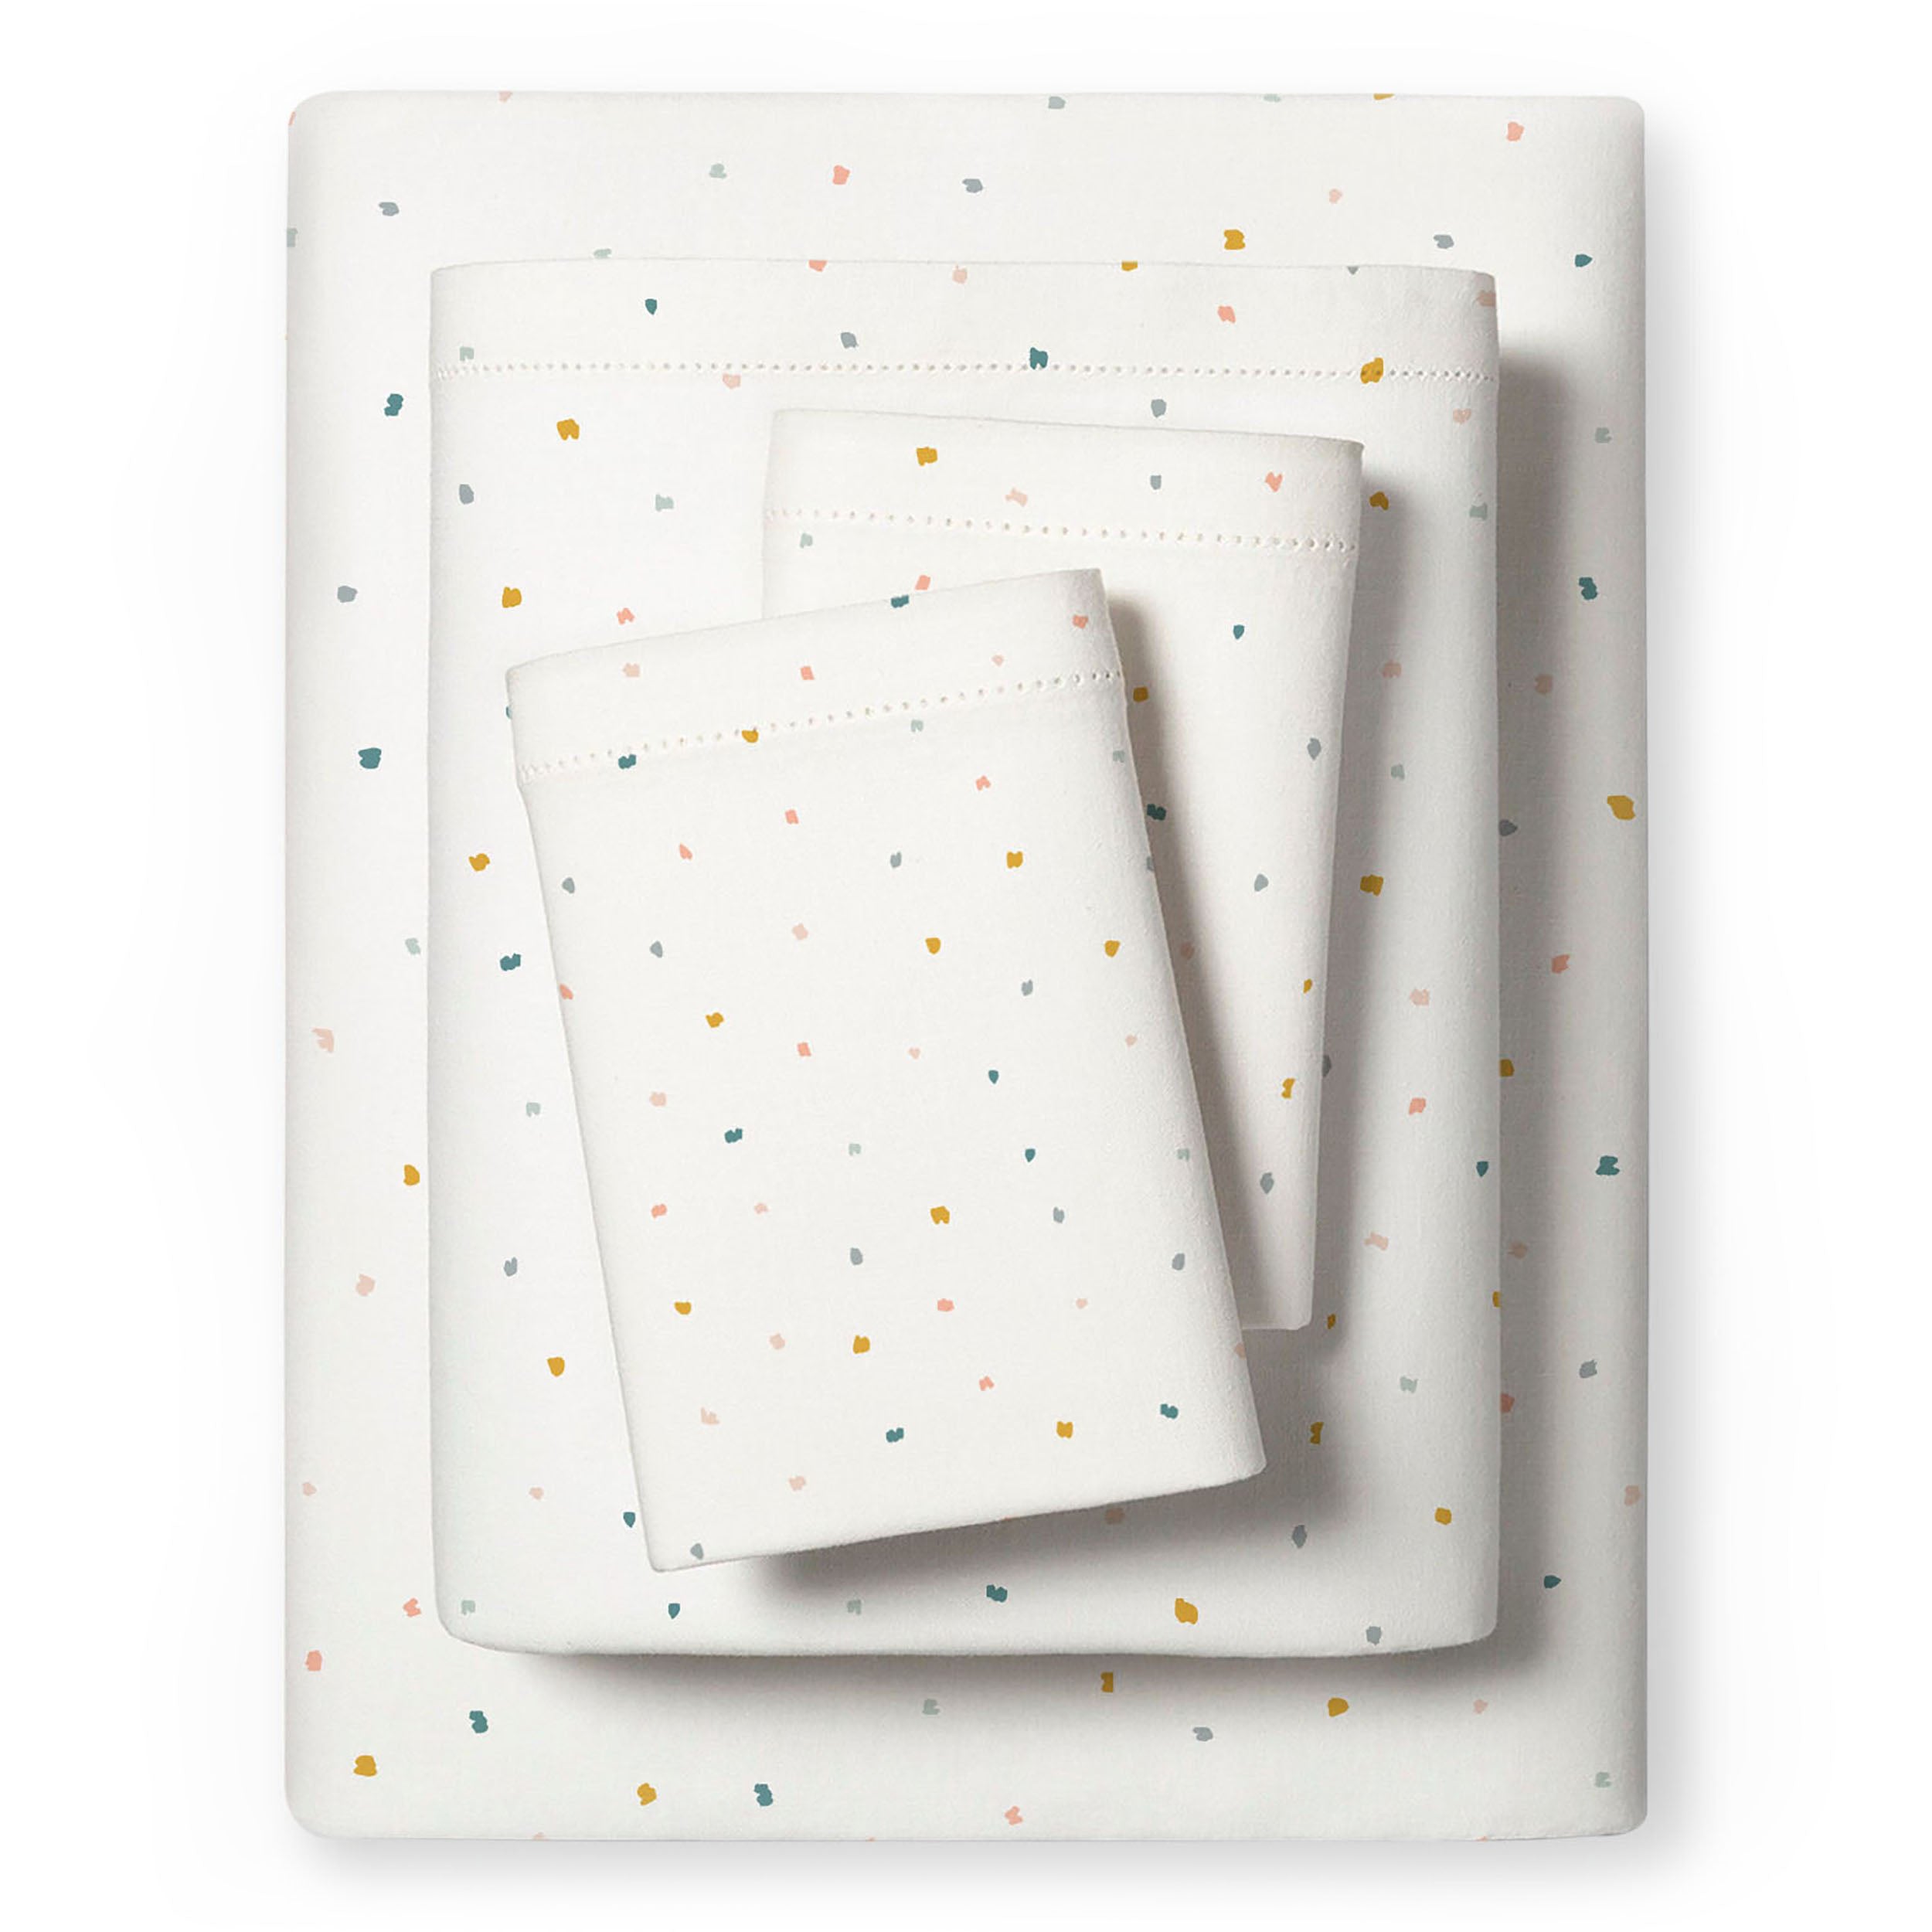 A neatly folded Makemake Organics Organic Cotton Sheet Set - Dotty with a white base and multicolored polka dots pattern, including a fitted sheet, flat sheet, and pillowcase.